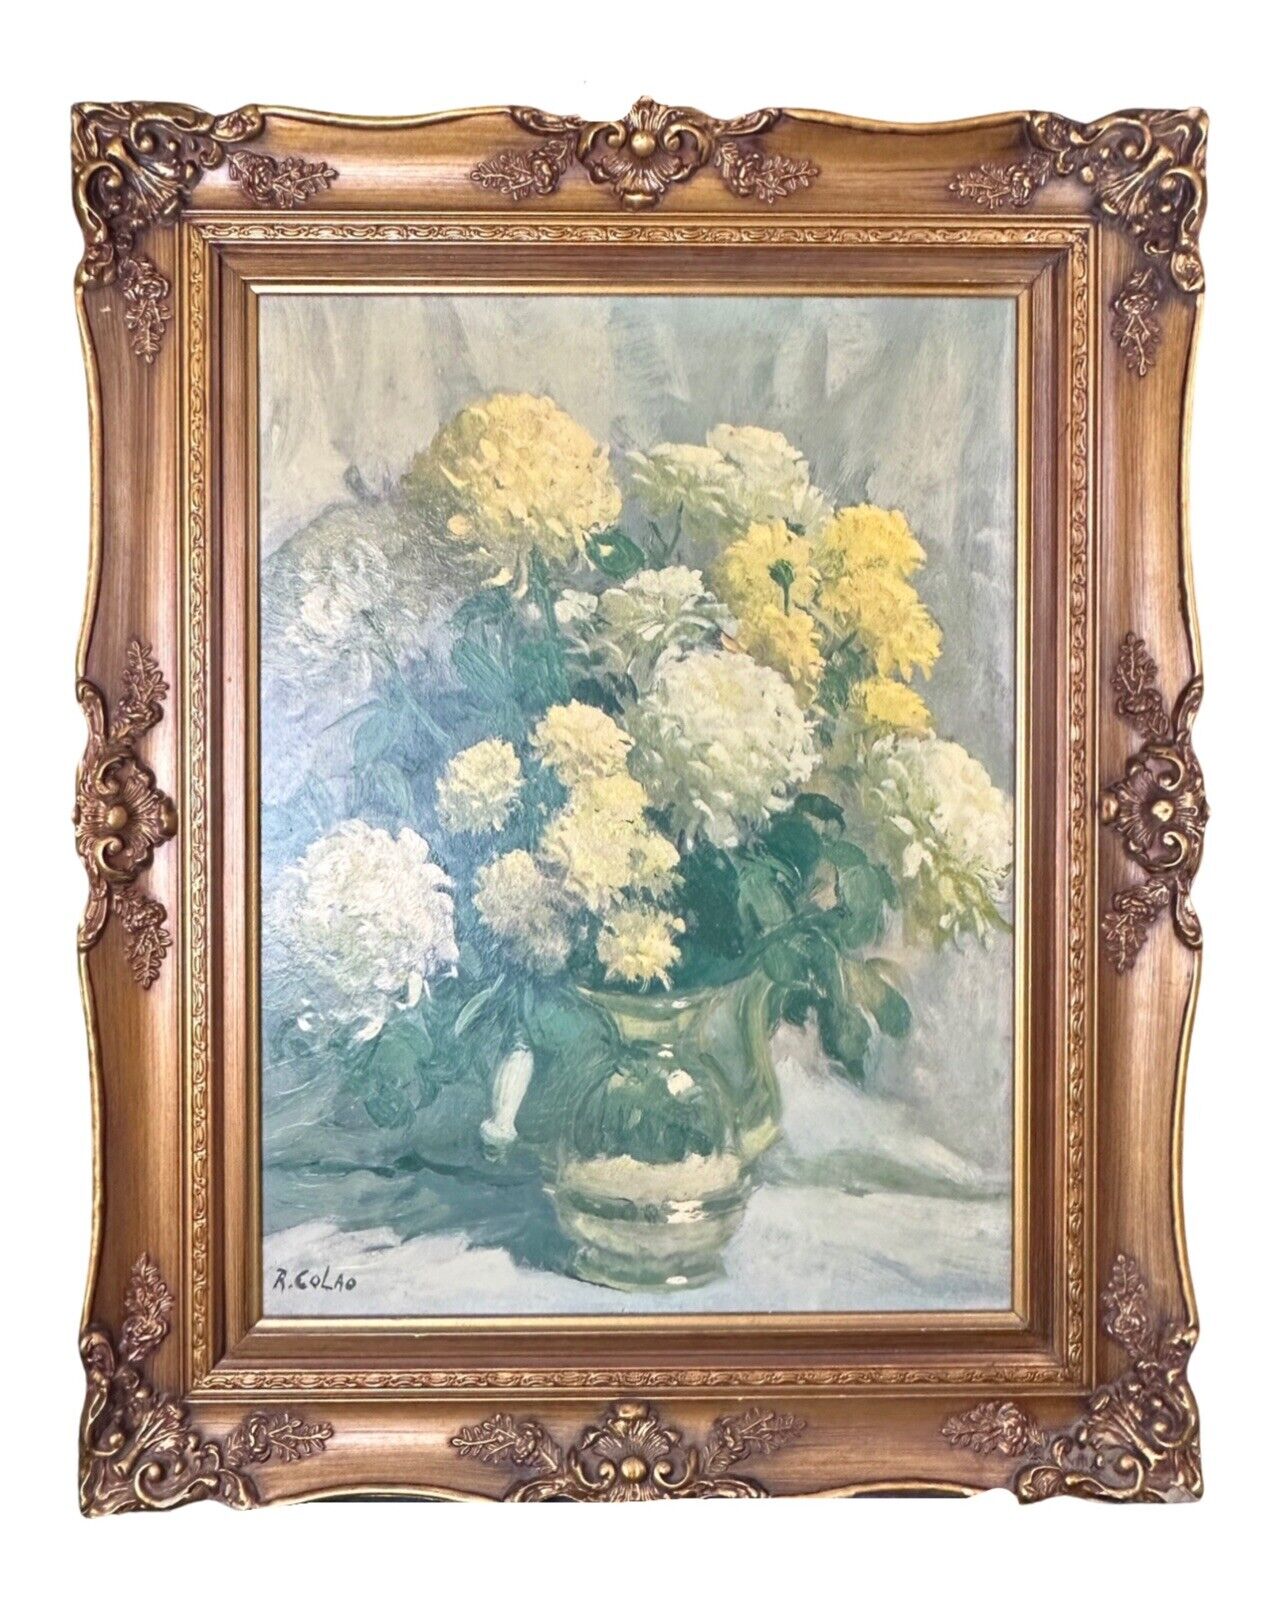 RALPH CAOLO Vintage Floral Still Life Lithograph in Carved Wood Frame